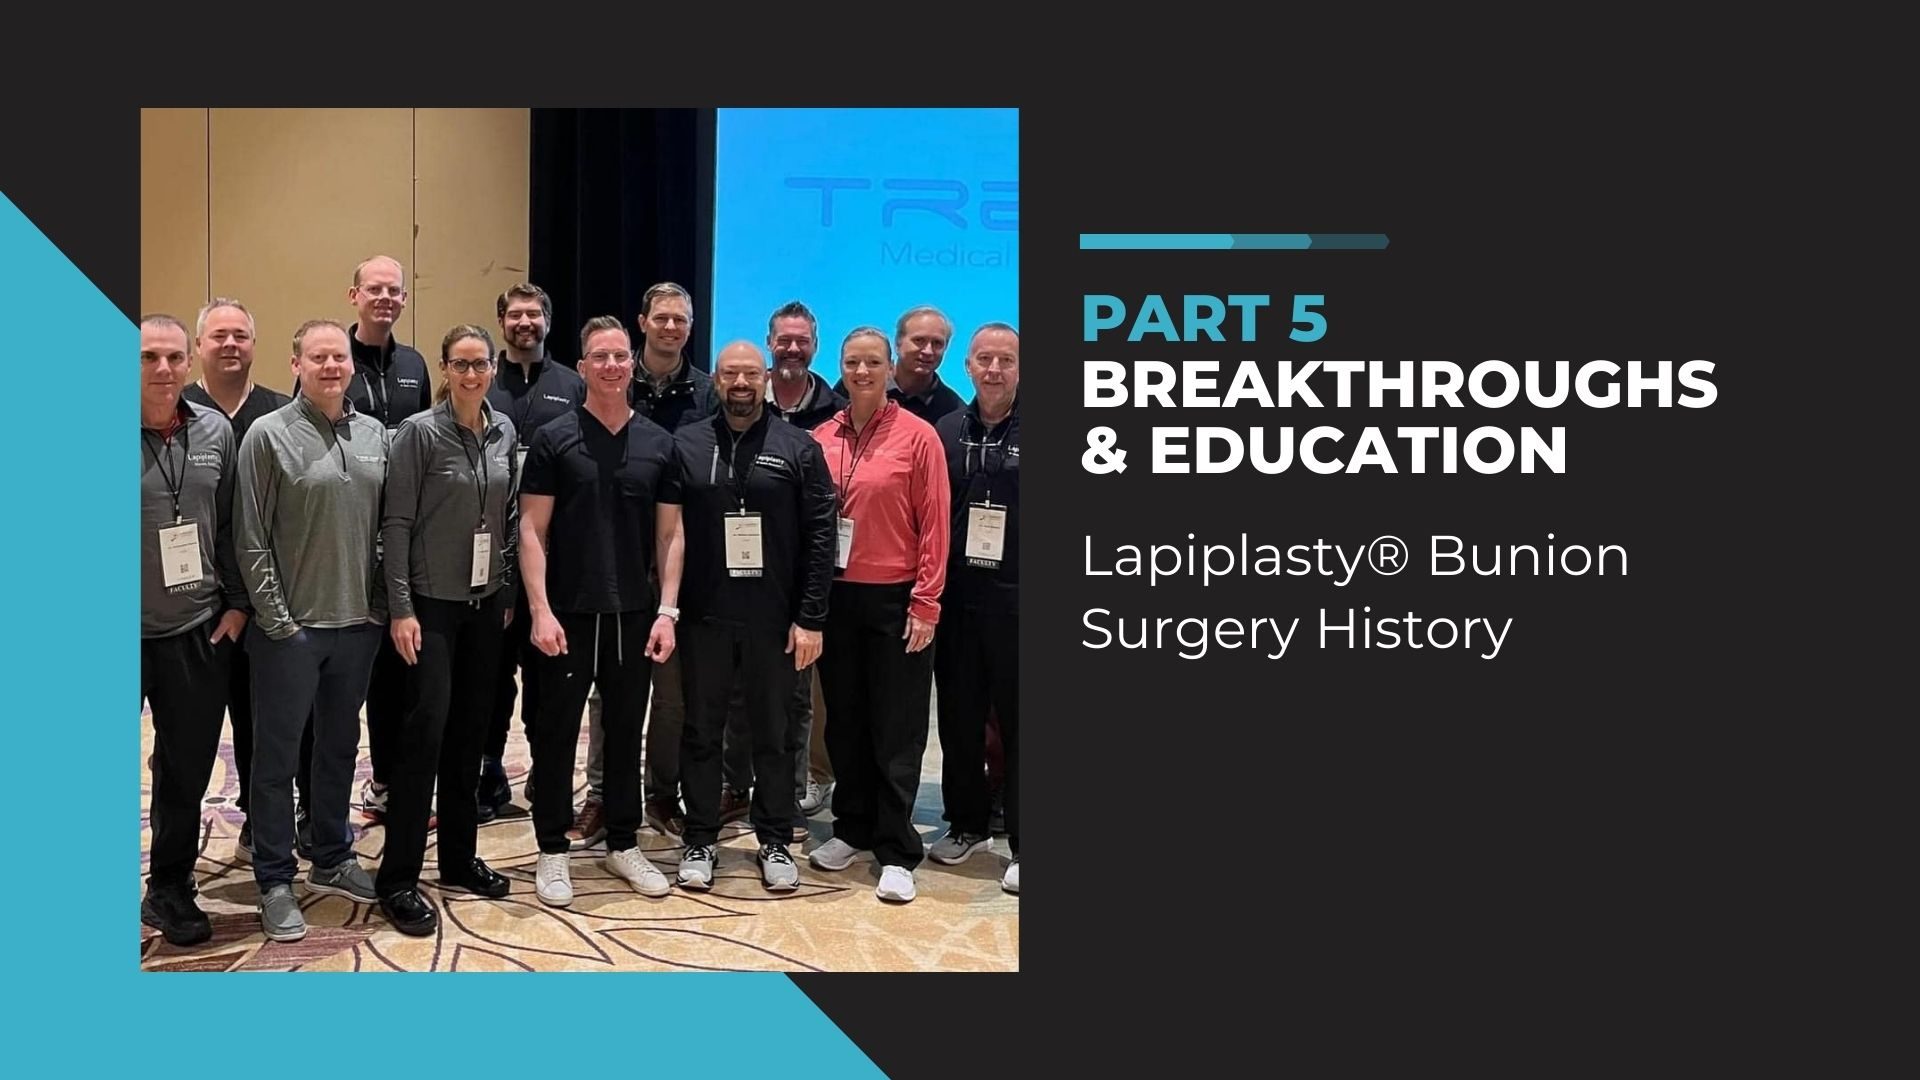 A group of eleven medical professionals stand together, smiling for a photo at a medical conference. They are in front of a presentation slide that reads 'PART 5 BREAKTHROUGHS & EDUCATION' with the 'TREace Medical' logo at the top. The slide also mentions 'Lapiplasty® Bunion Surgery History'. The individuals are dressed in business casual attire, with conference name tags. The background suggests a conference hall setting.